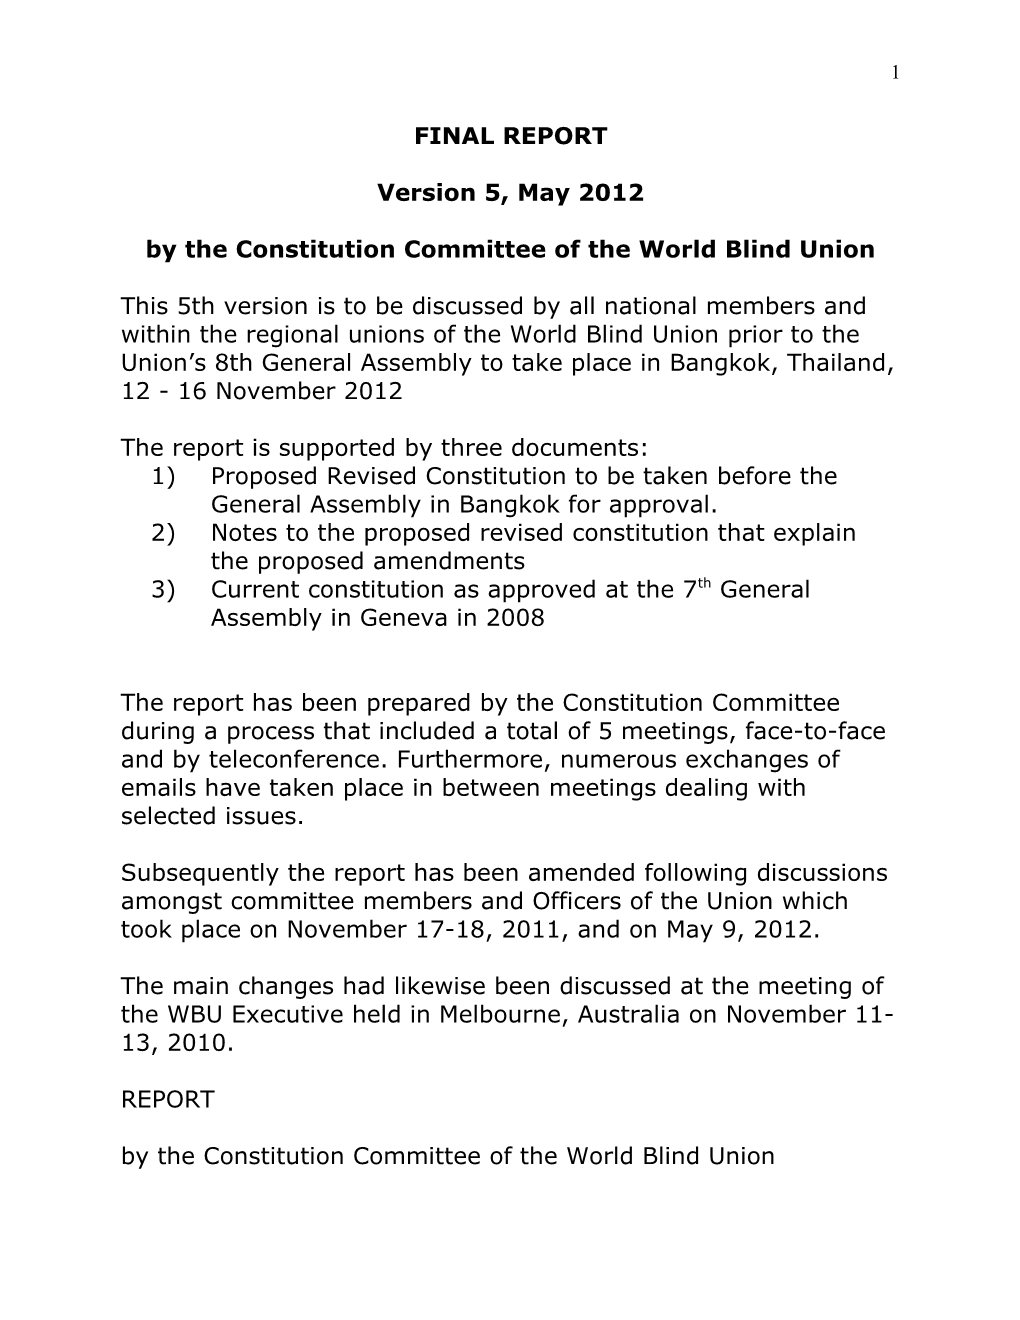 By the Constitution Committee of the World Blind Union